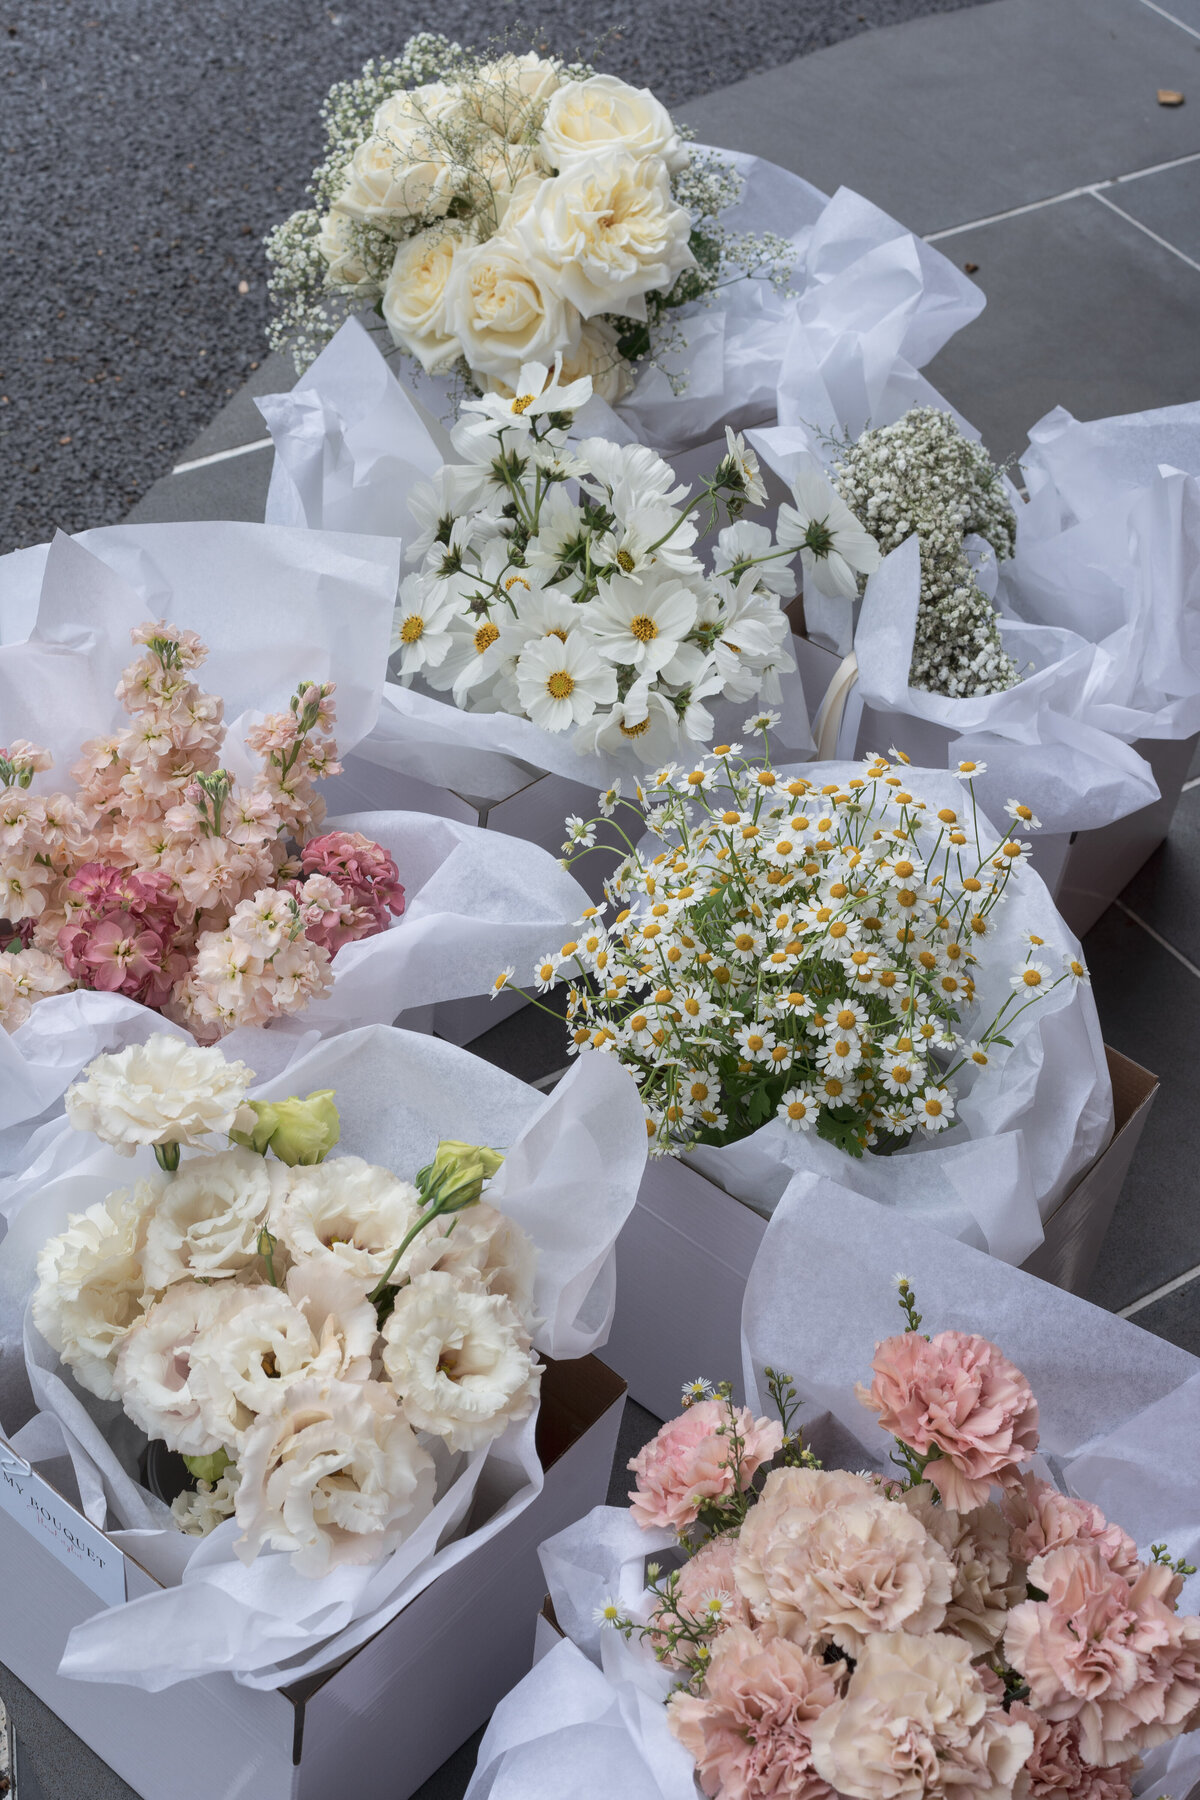 An example of the beautiful bouquets that are packaged up after a wedding